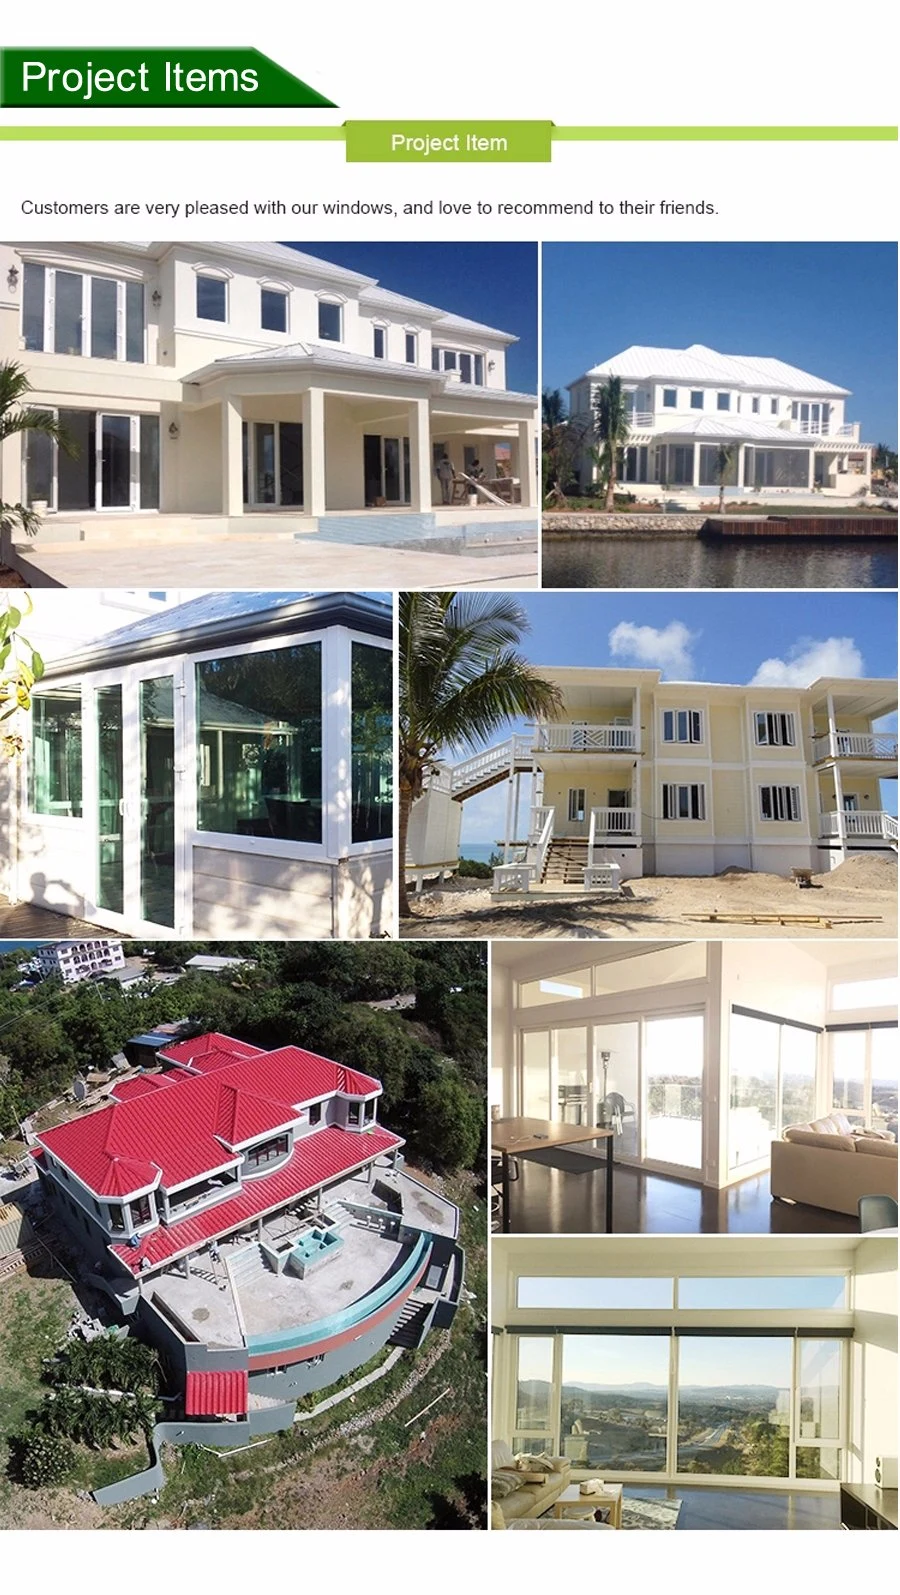 Caribbean Residential Homes Vinyl High Storm Proof Awning Windows